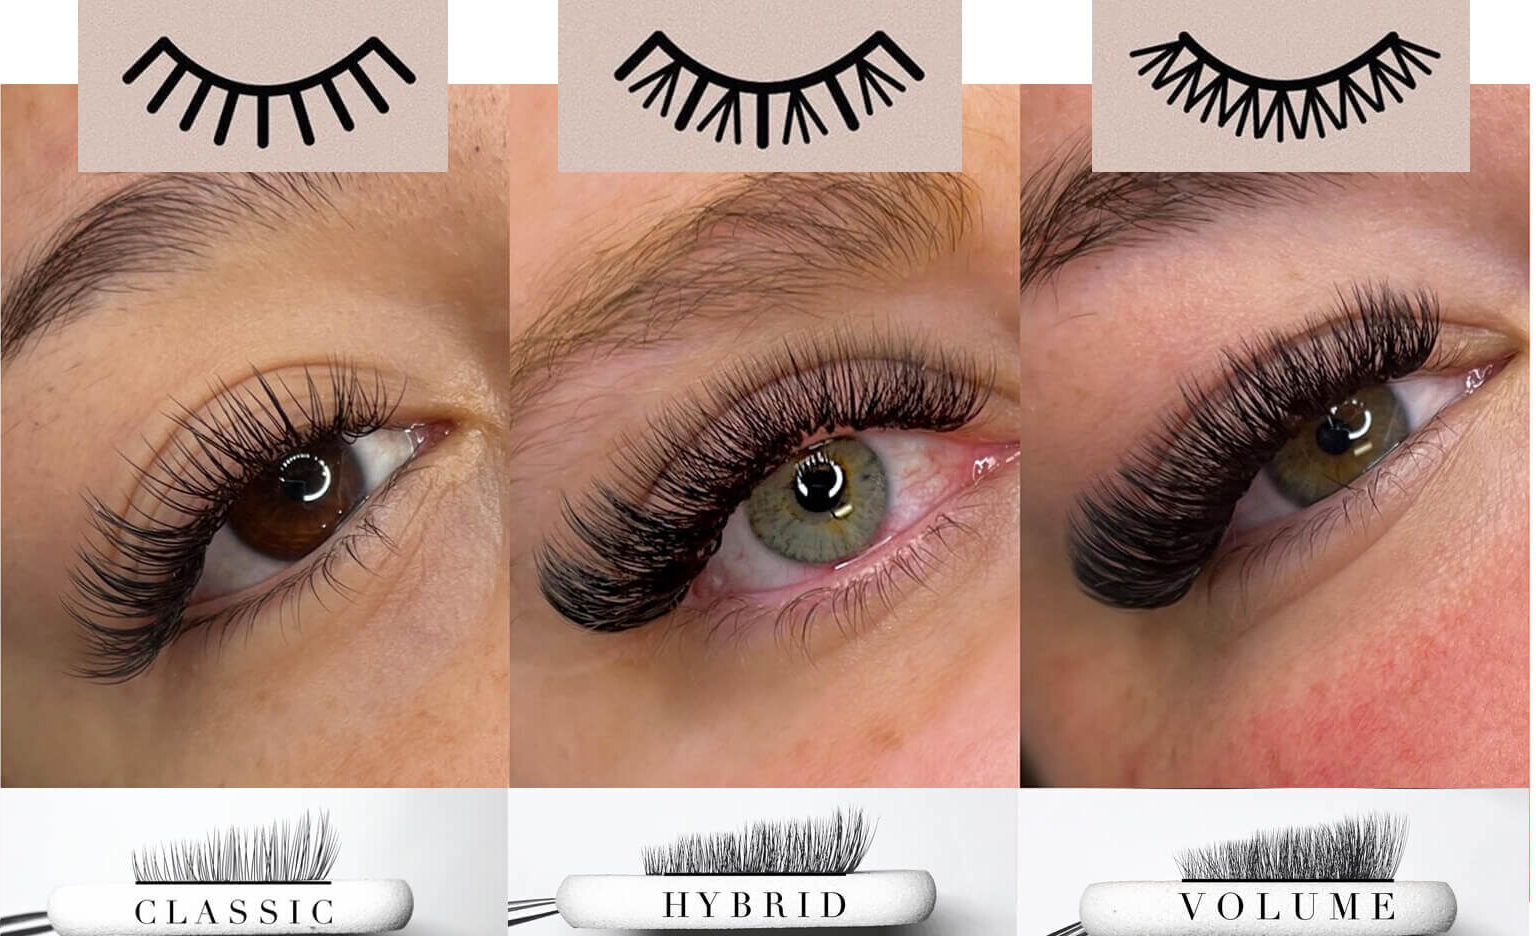 Hybrid Lash Extensions Guide You Need To Know Leading Plant Fiber Lashes Manufacturer Levi